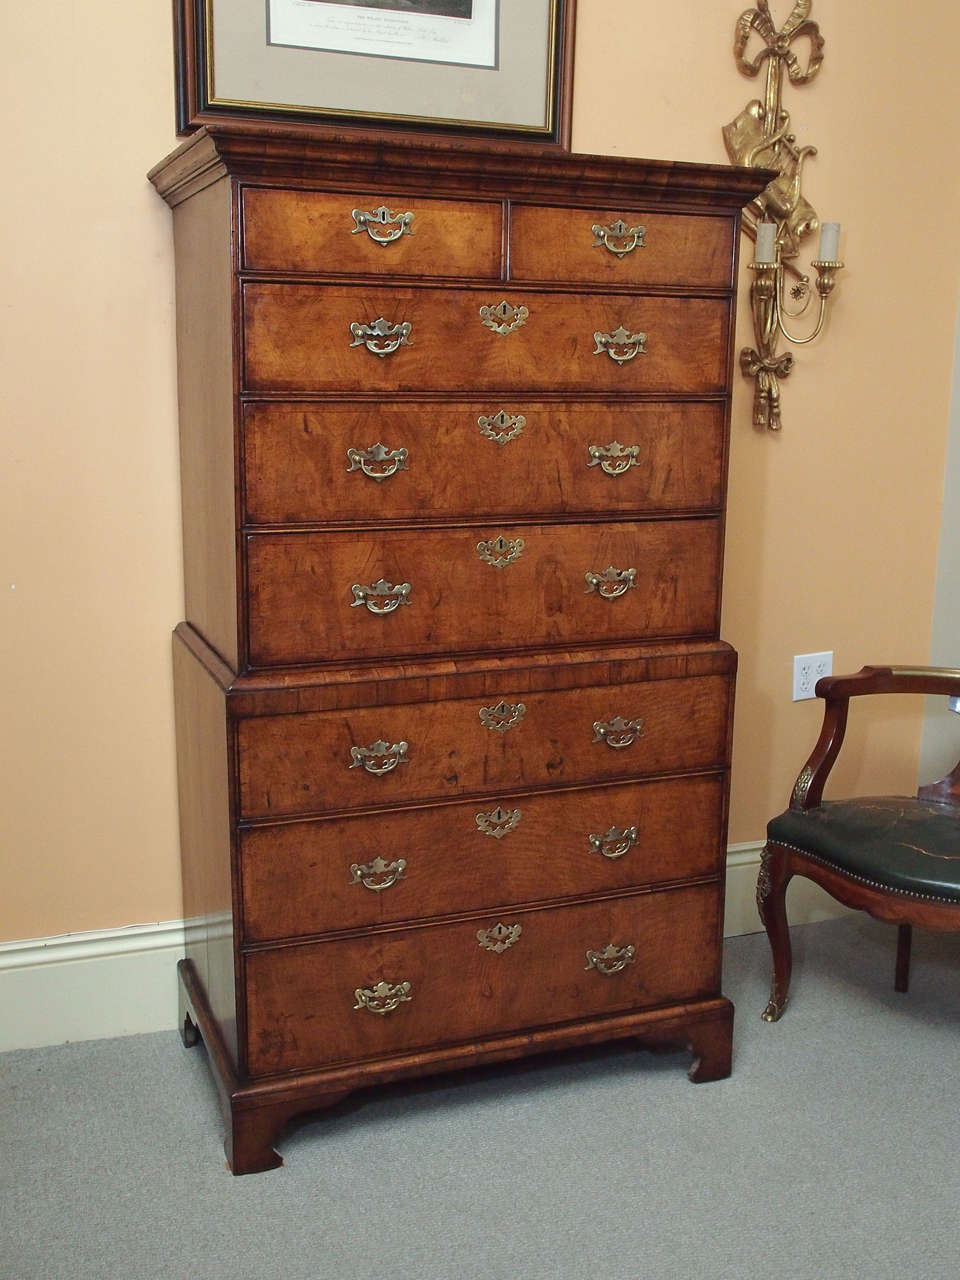 Early 18th century English George I walnut chest-on-chest.  Circa 1725.  Beautiful proportions and patina.